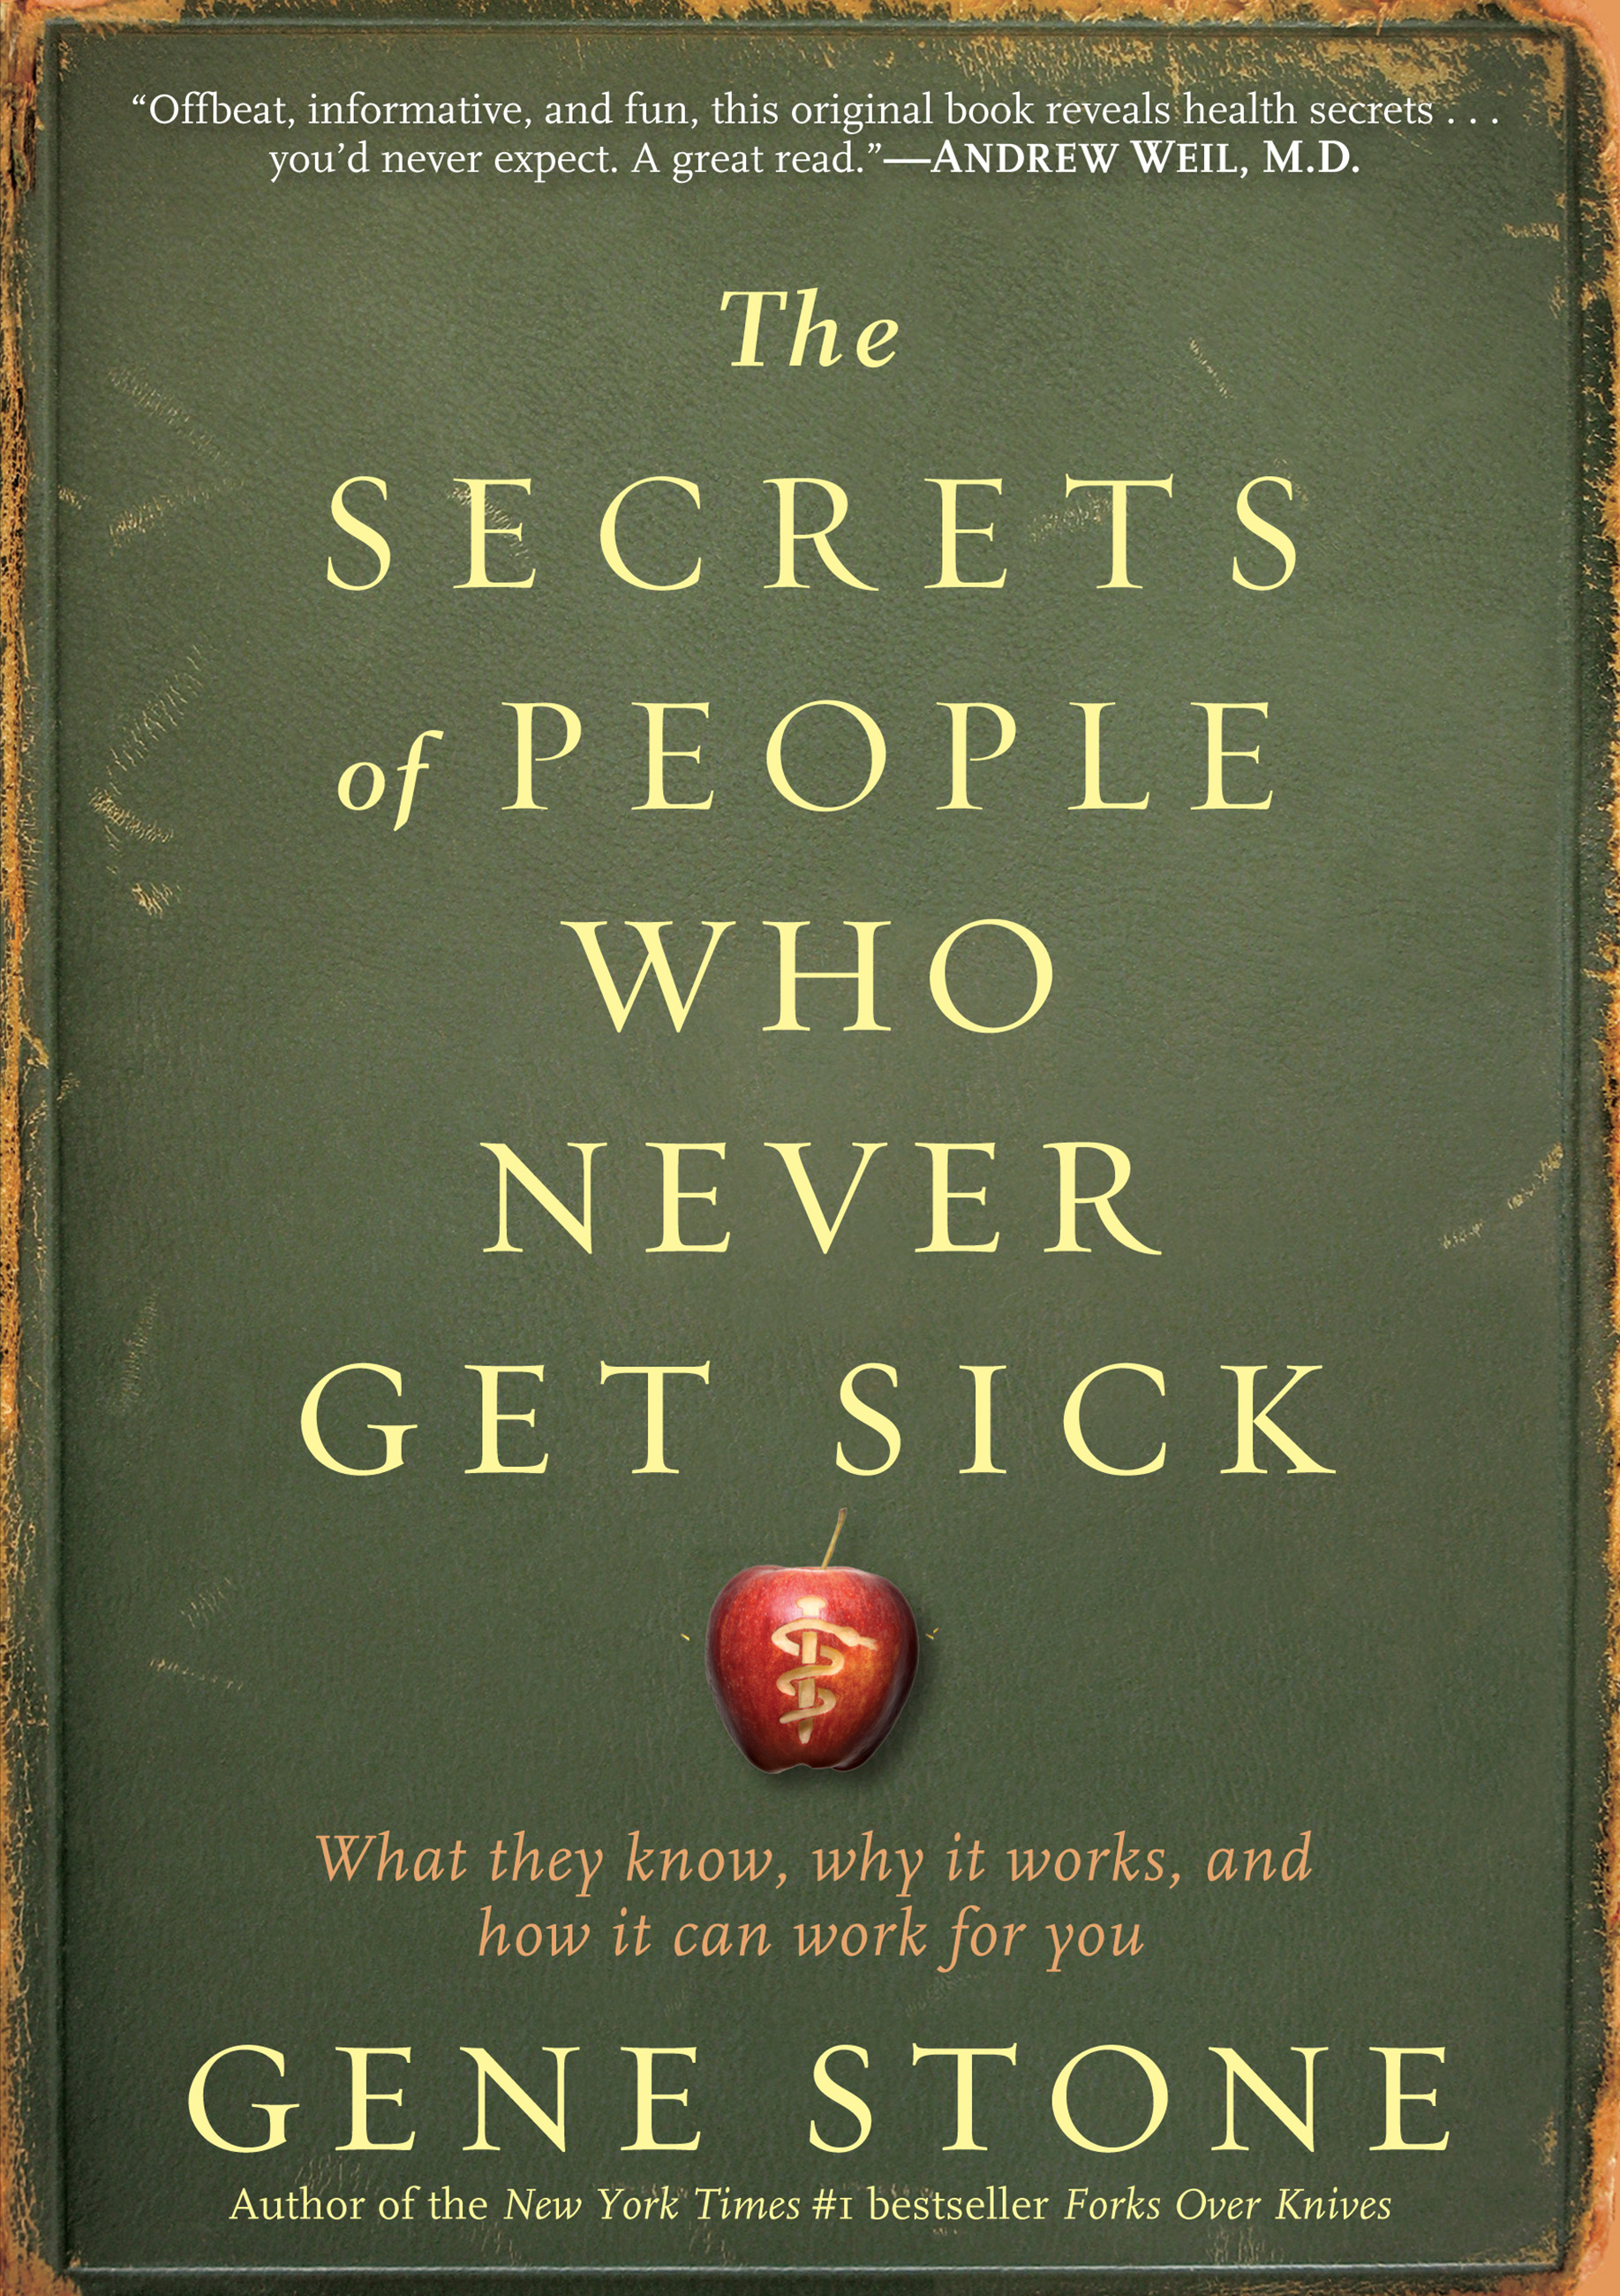 The secrets of people who never get sick what they know, why it works, and how it can work for you cover image